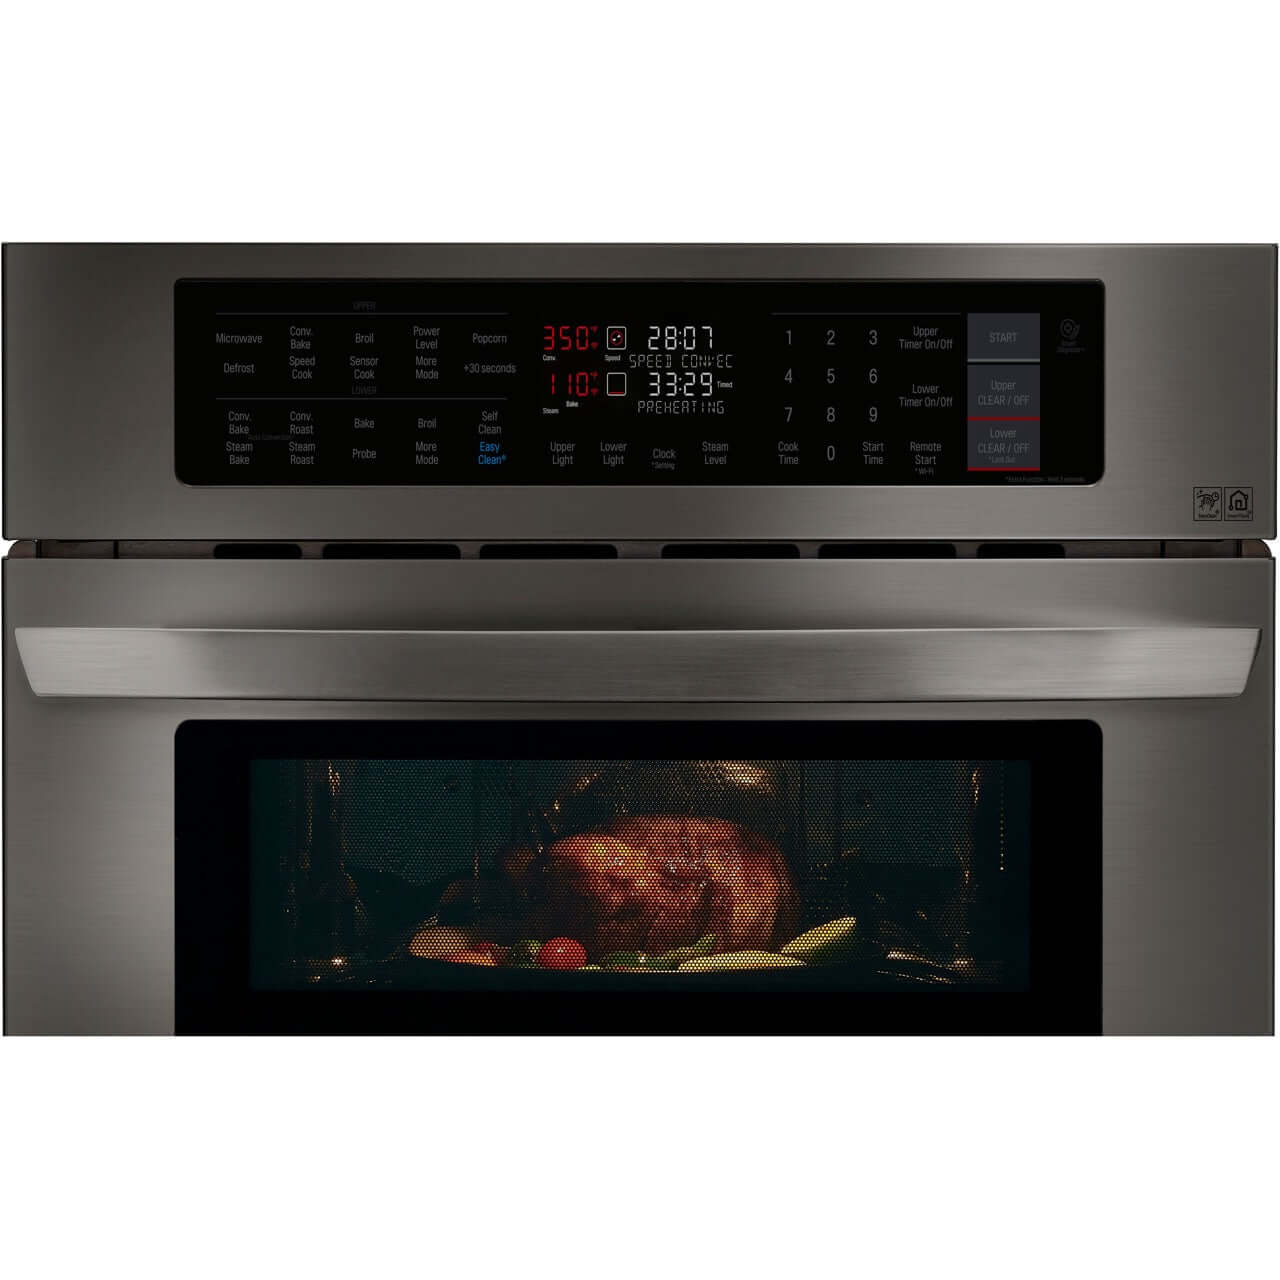 LG 30-in. Combination Wall Oven in Black Stainless Steel (LWC3063BD)